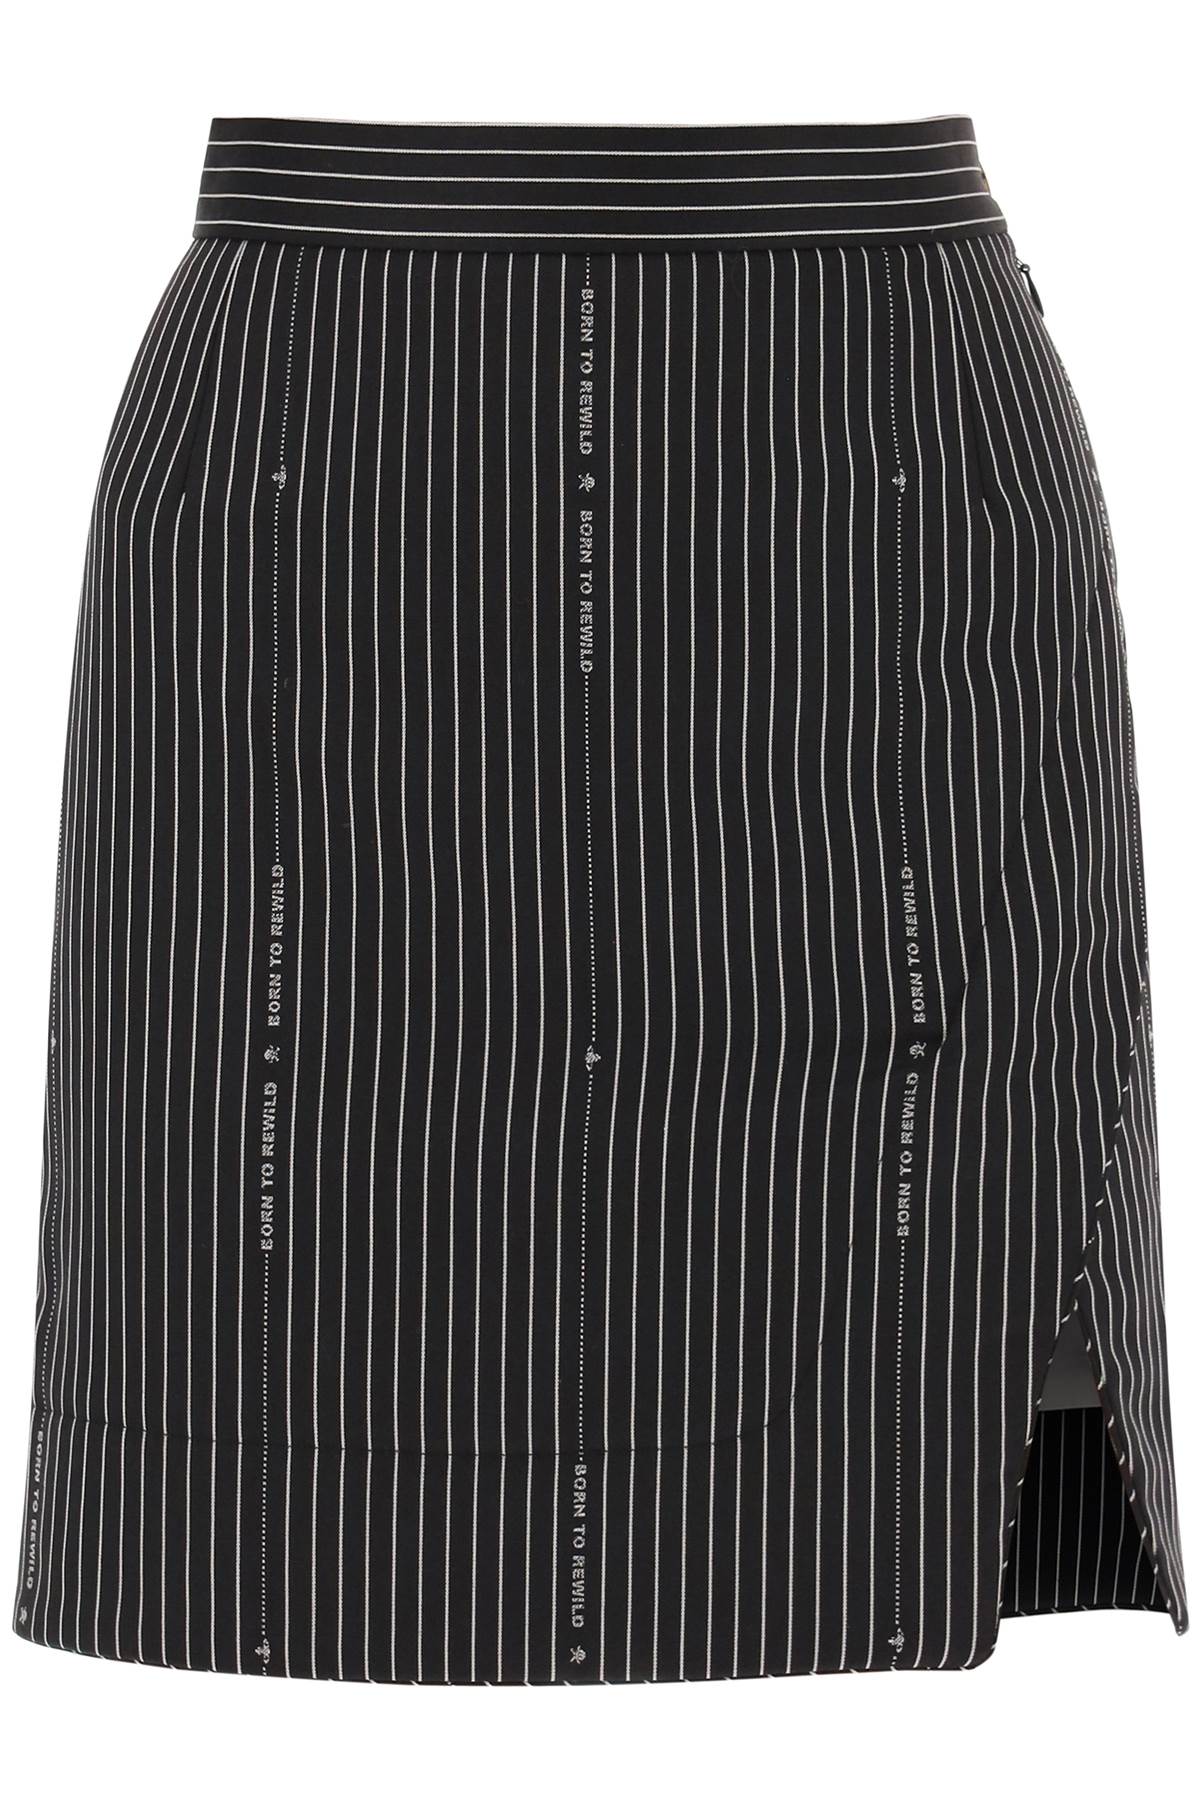 Born to Rewild Pinstriped Mini Skirt - SS23 Collection